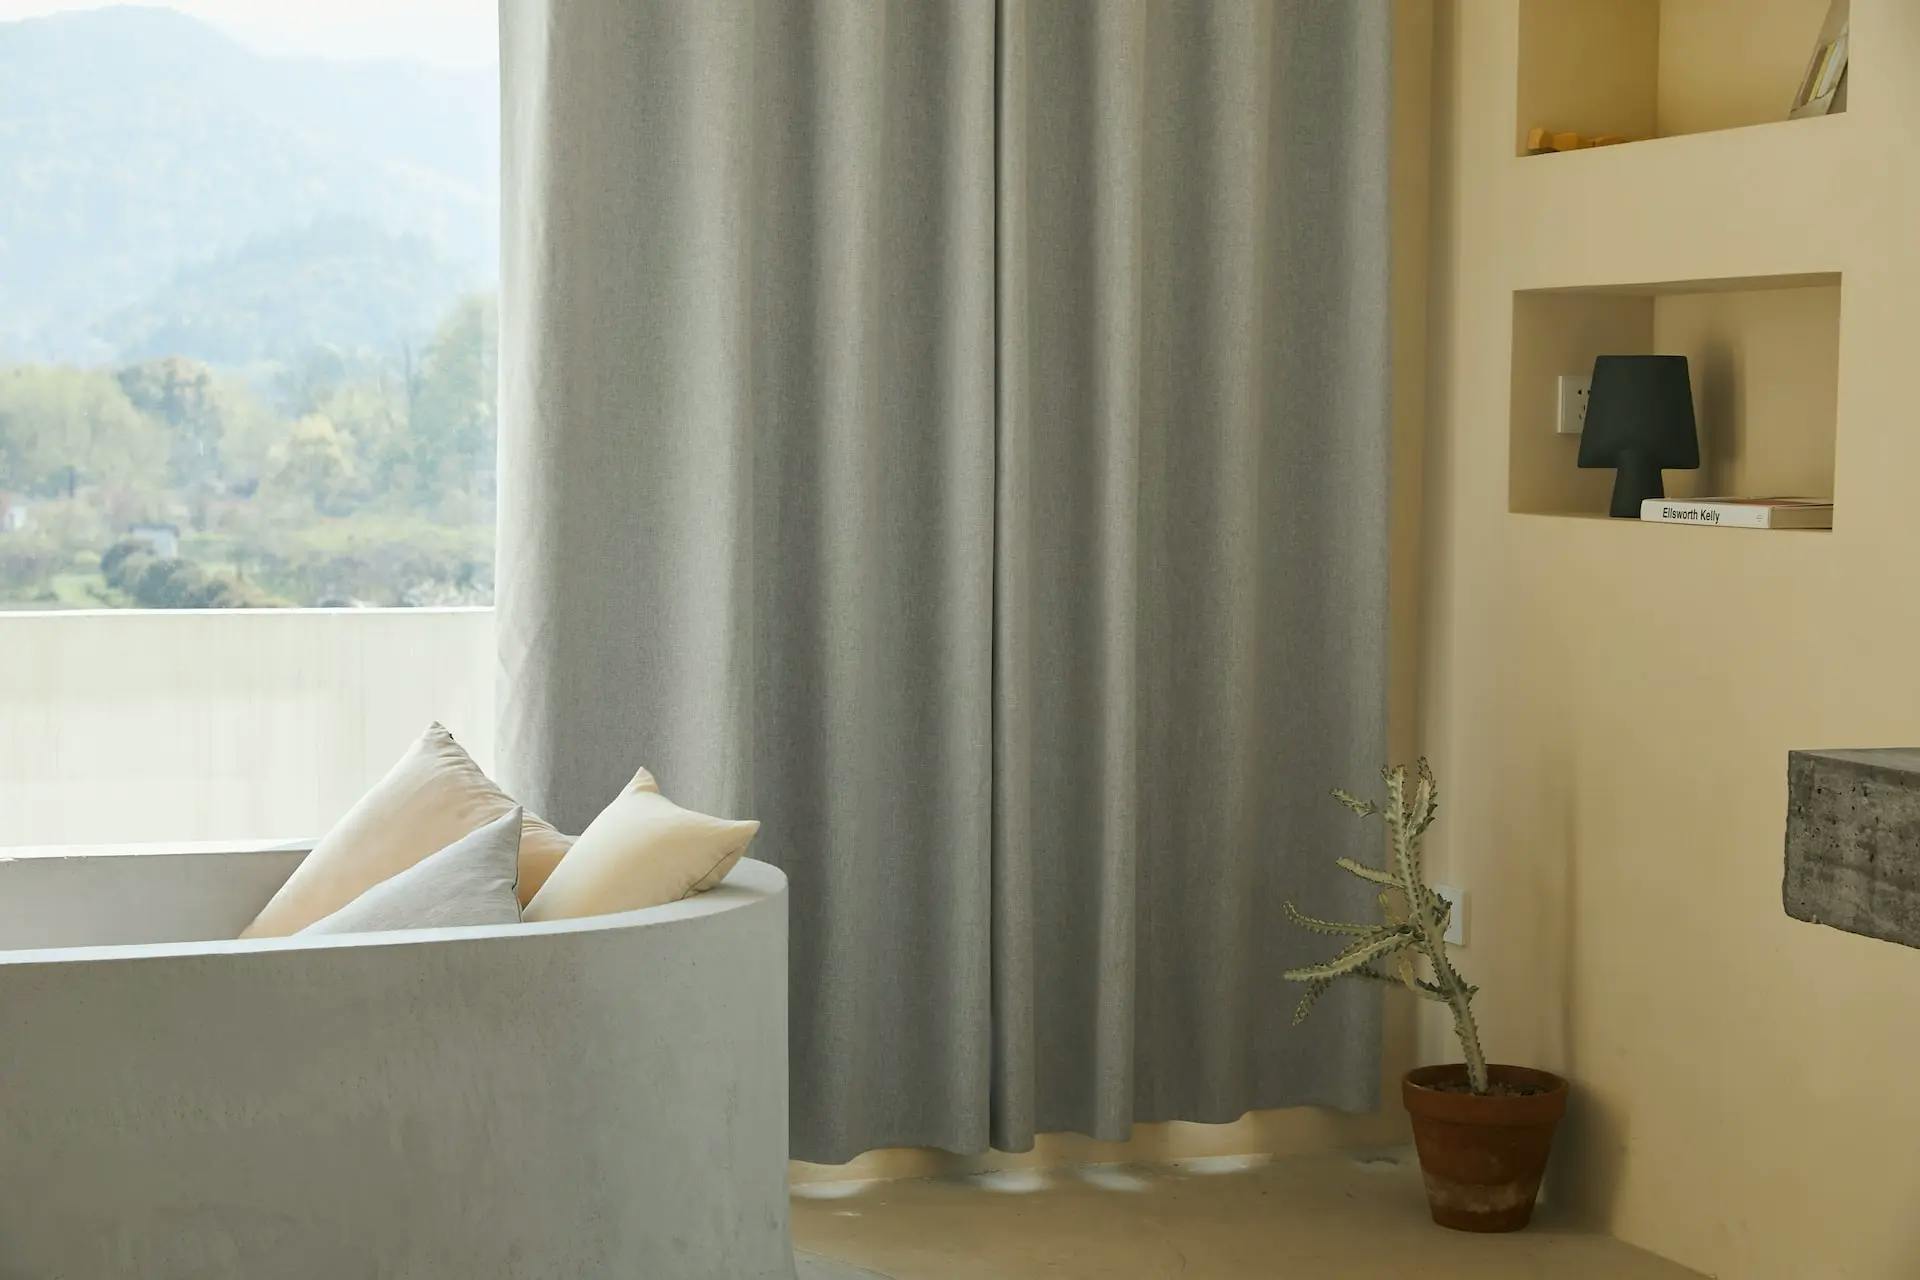 A room with curtains